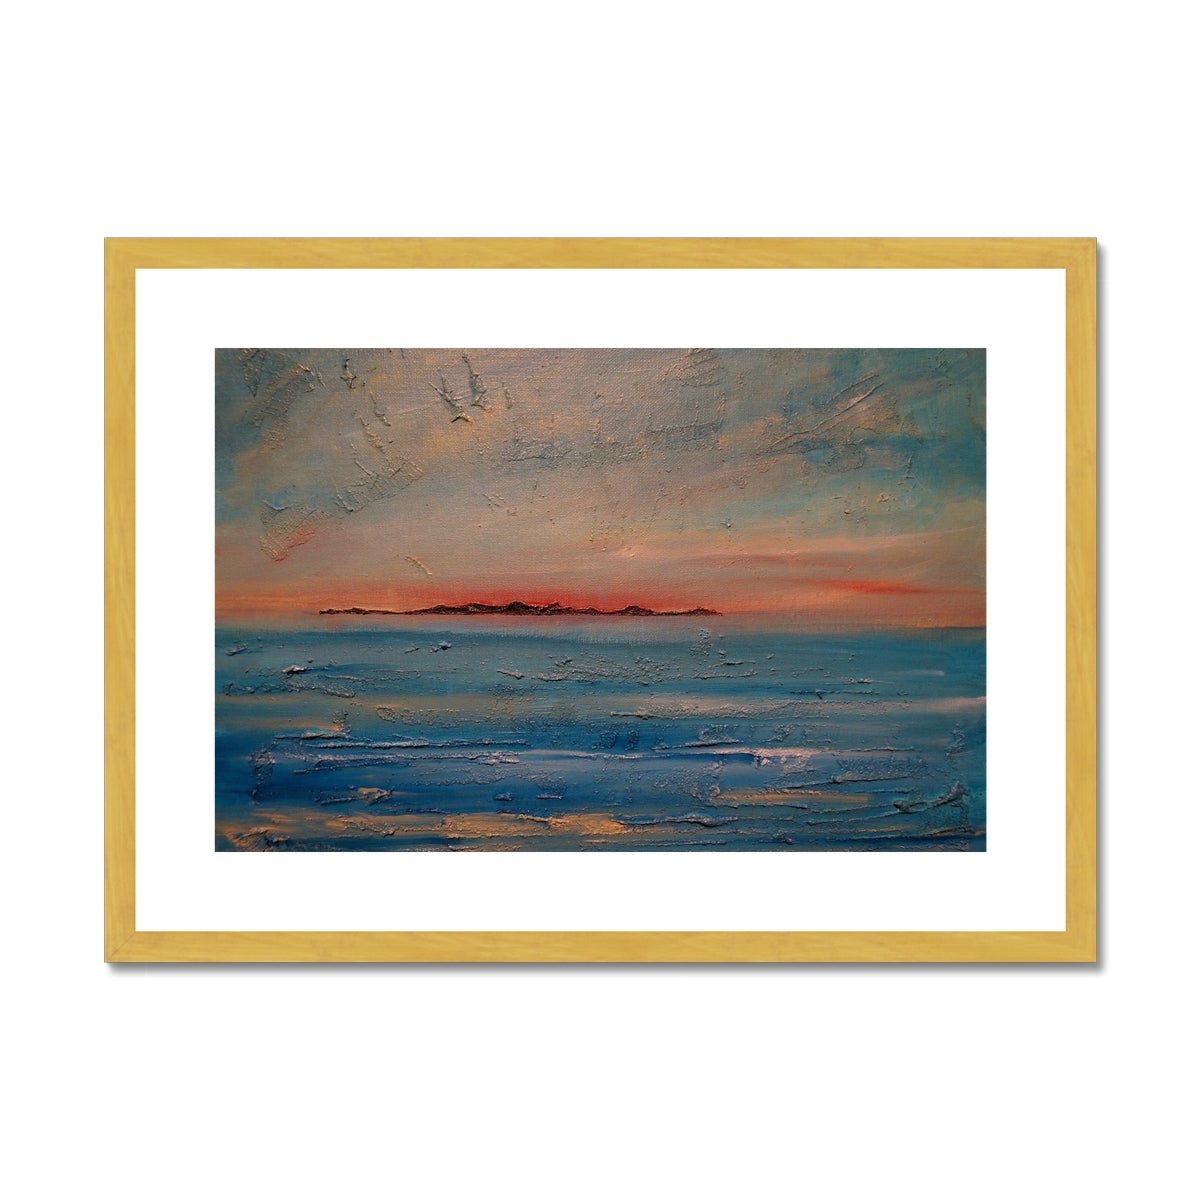 Gigha Sunset Painting | Antique Framed & Mounted Prints From Scotland-Antique Framed & Mounted Prints-Hebridean Islands Art Gallery-A2 Landscape-Gold Frame-Paintings, Prints, Homeware, Art Gifts From Scotland By Scottish Artist Kevin Hunter